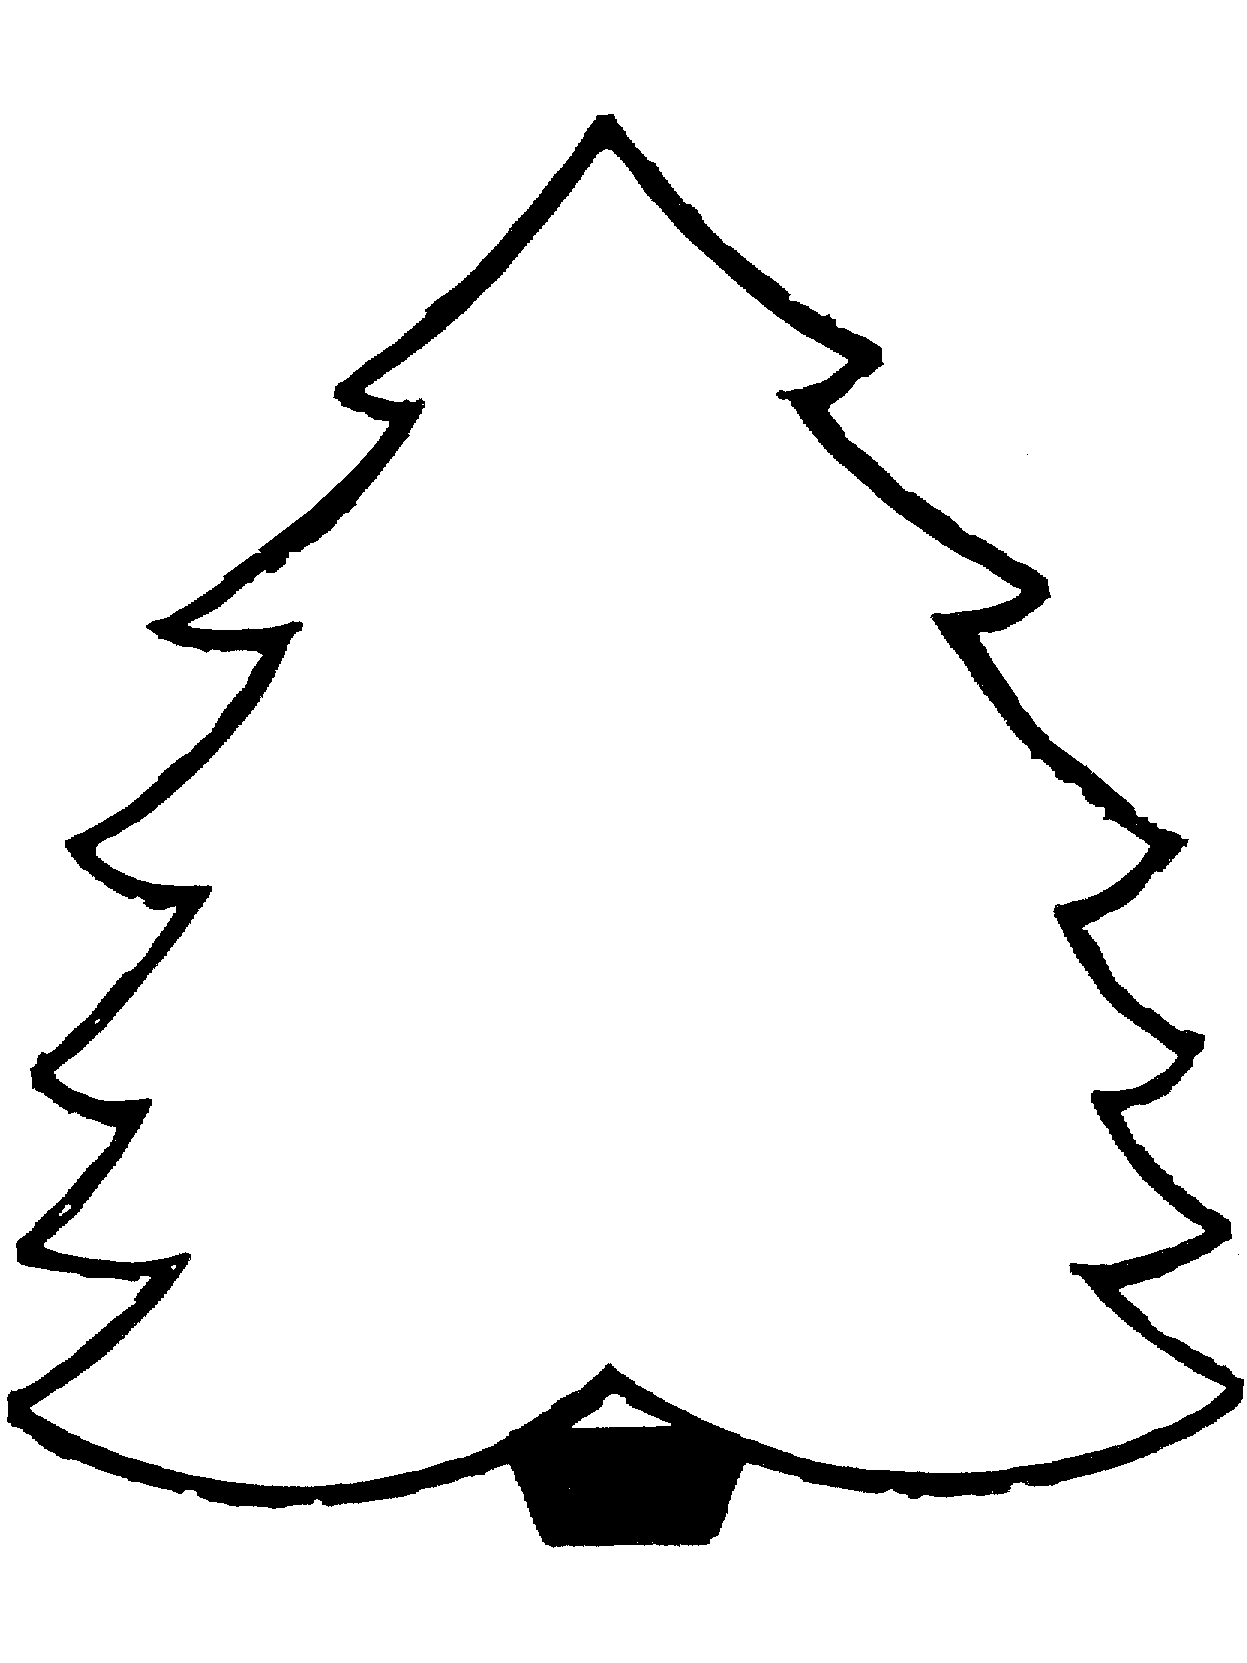 Christmas Tree Clip Art Outline Cliparts.co